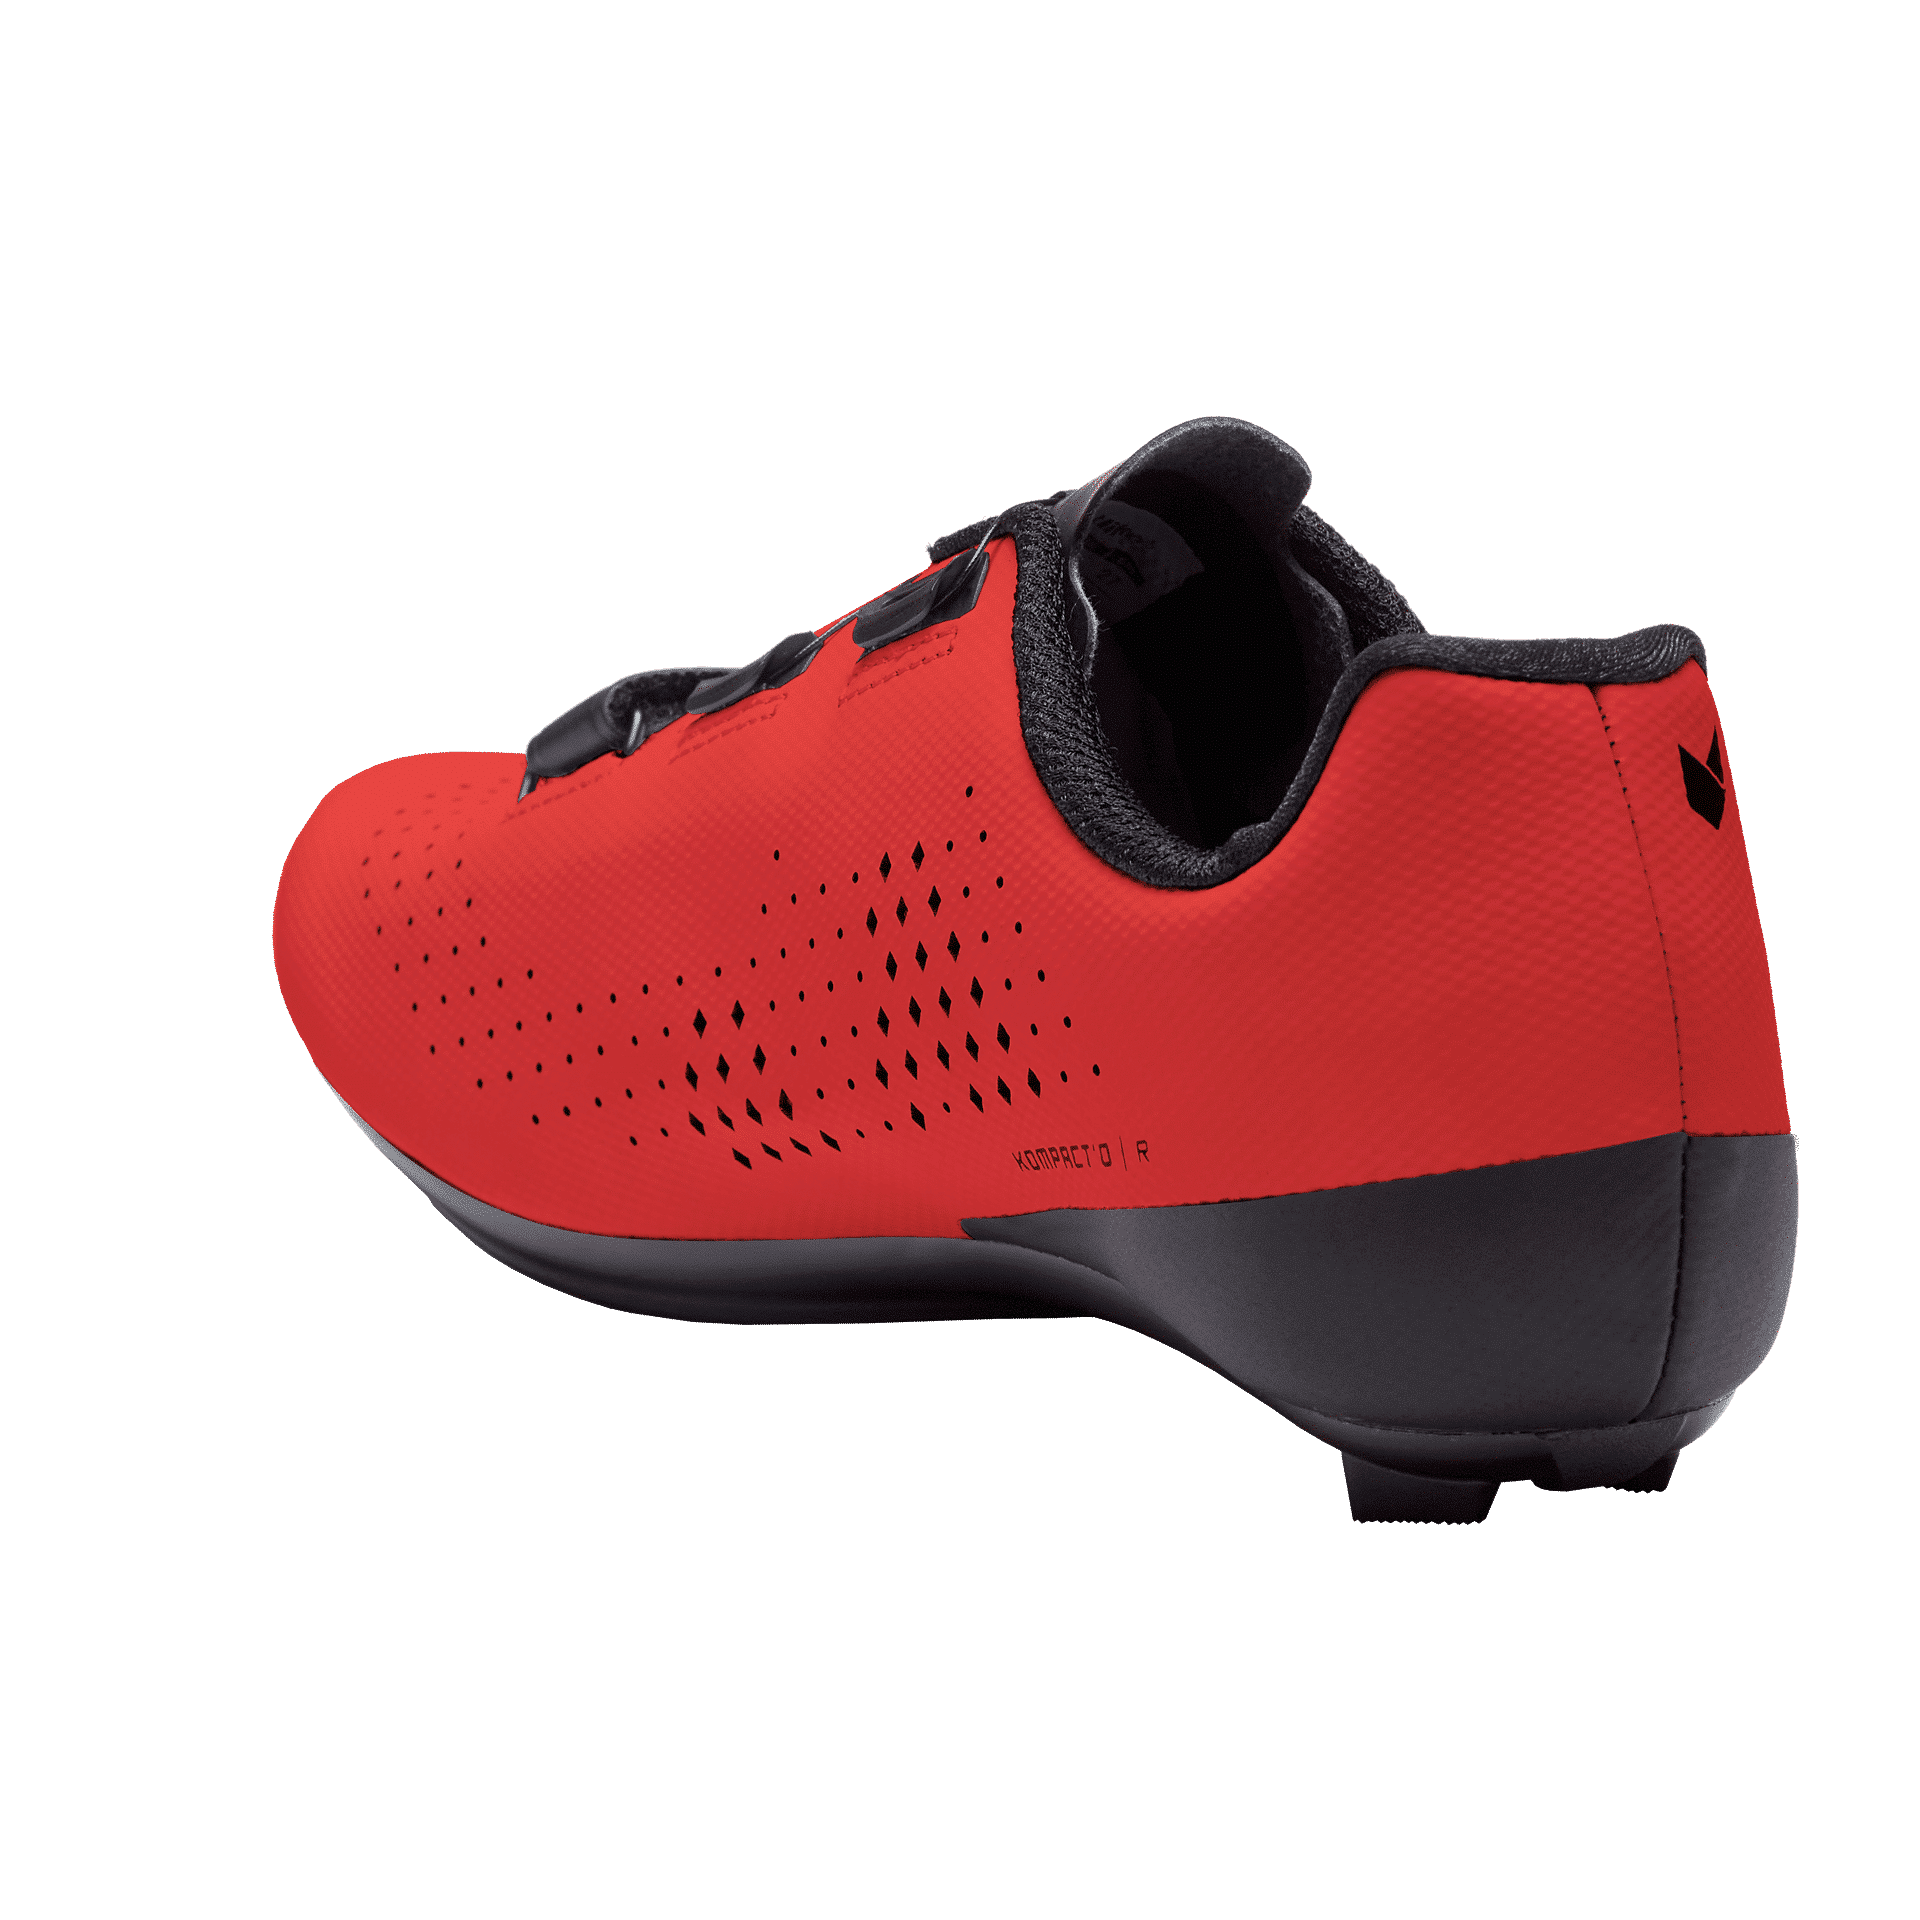 A product picture of the Catlike Kompact`O R Road Shoes